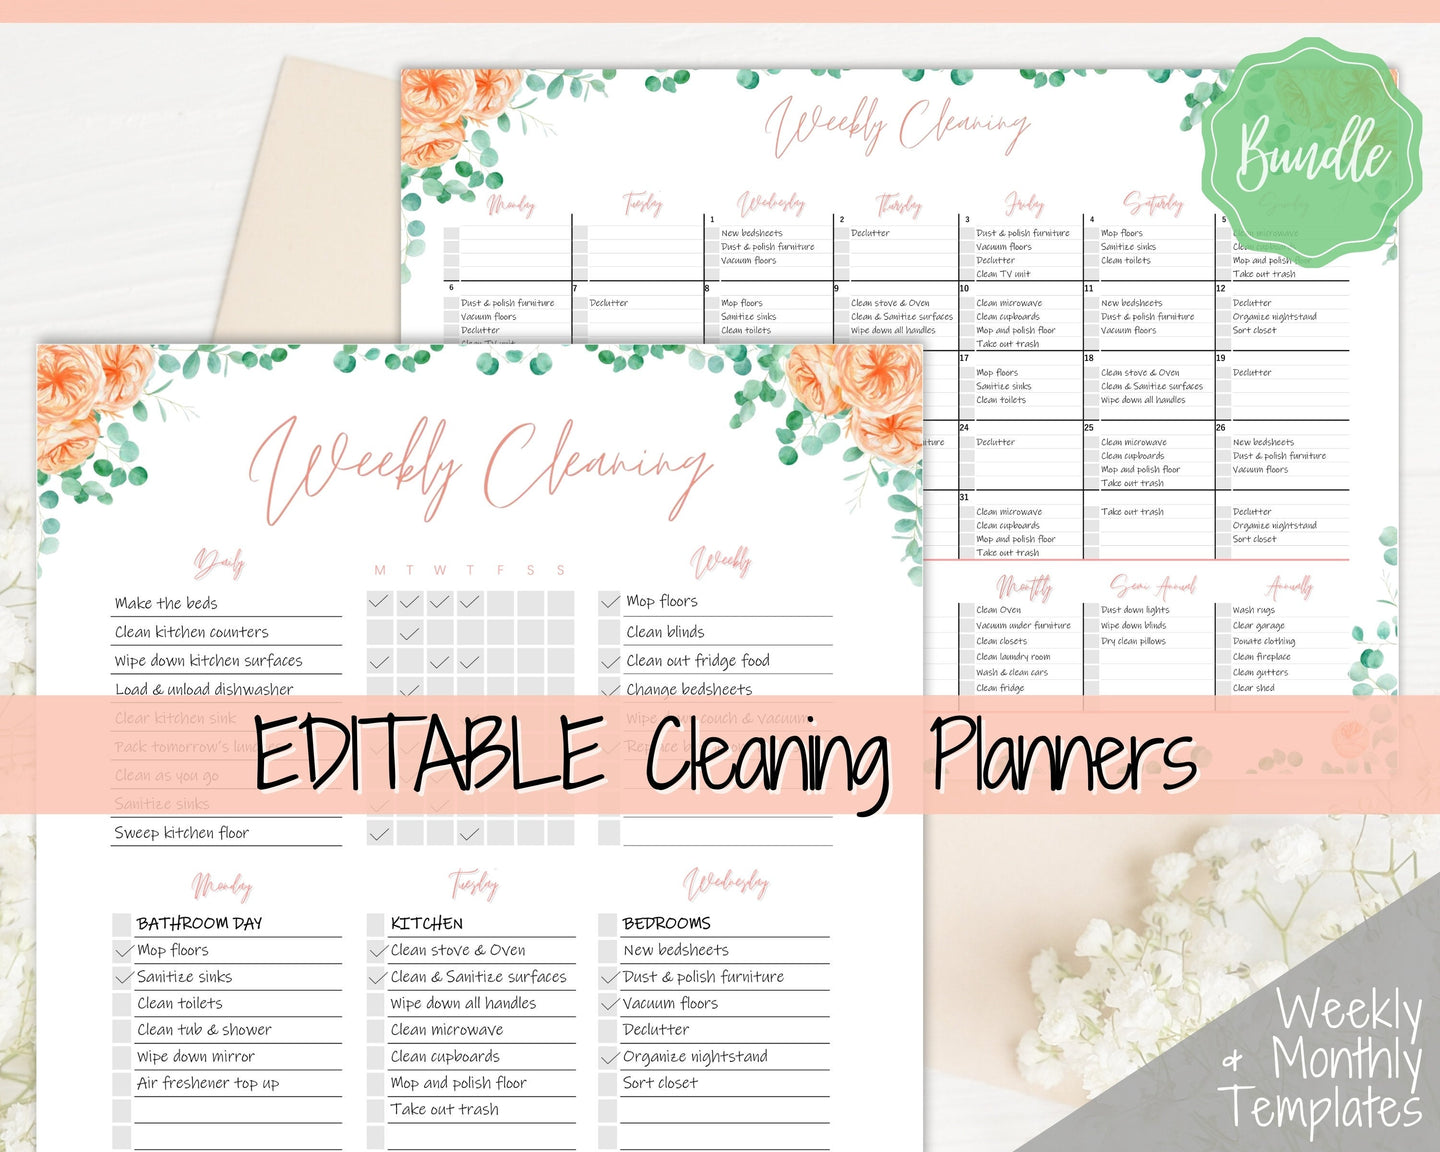 EDITABLE Cleaning Planner, EDITABLE Cleaning Checklist, Cleaning Schedule, Weekly House Chores, Clean Home Routine, Monthly Cleaning List | Flower